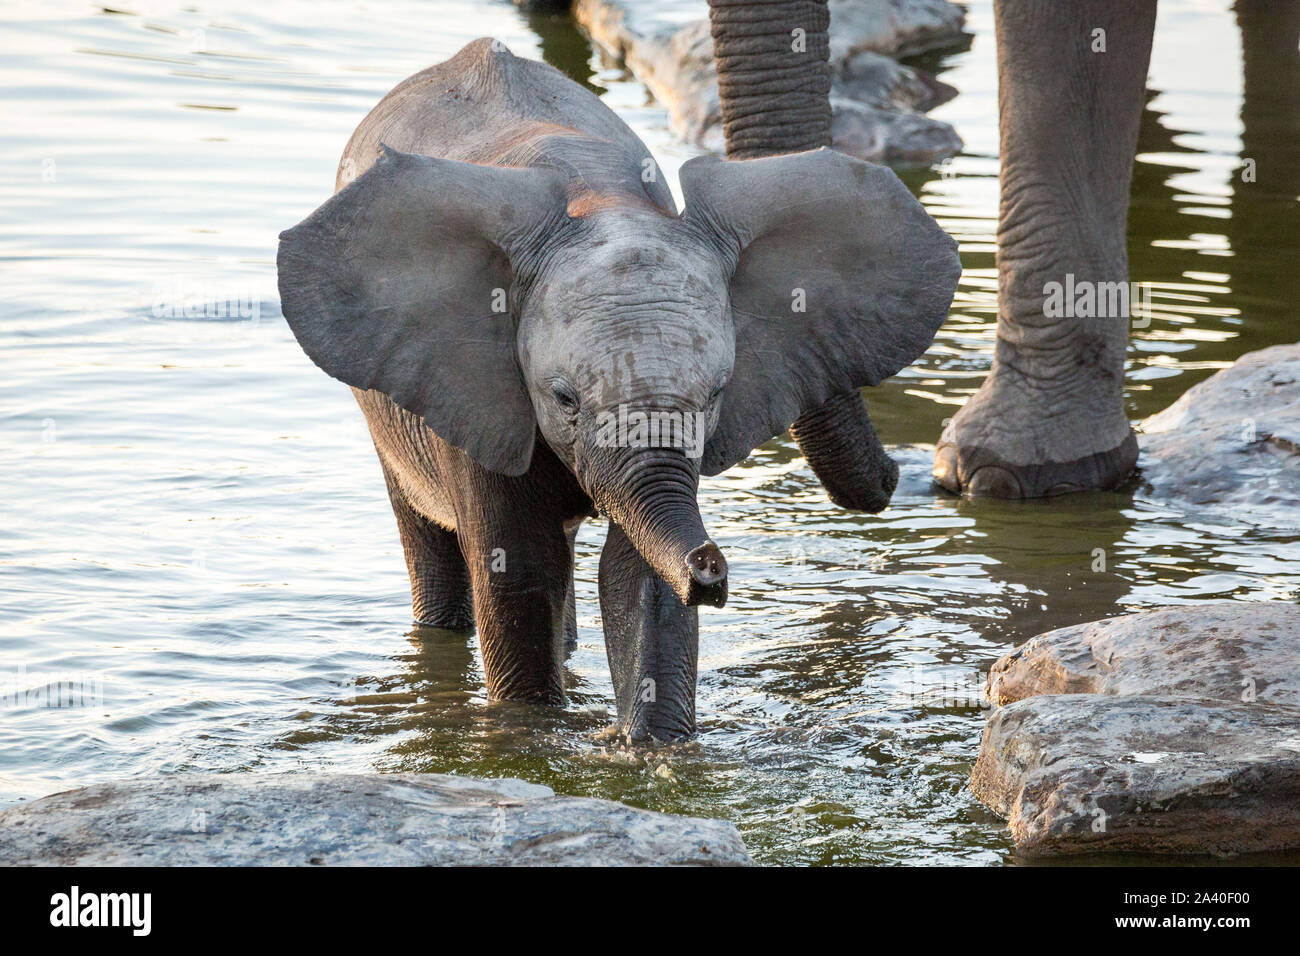 Cute elephant baby standing in a waterhole and playing with the water, Etosha, Namibia, Africa Stock Photo